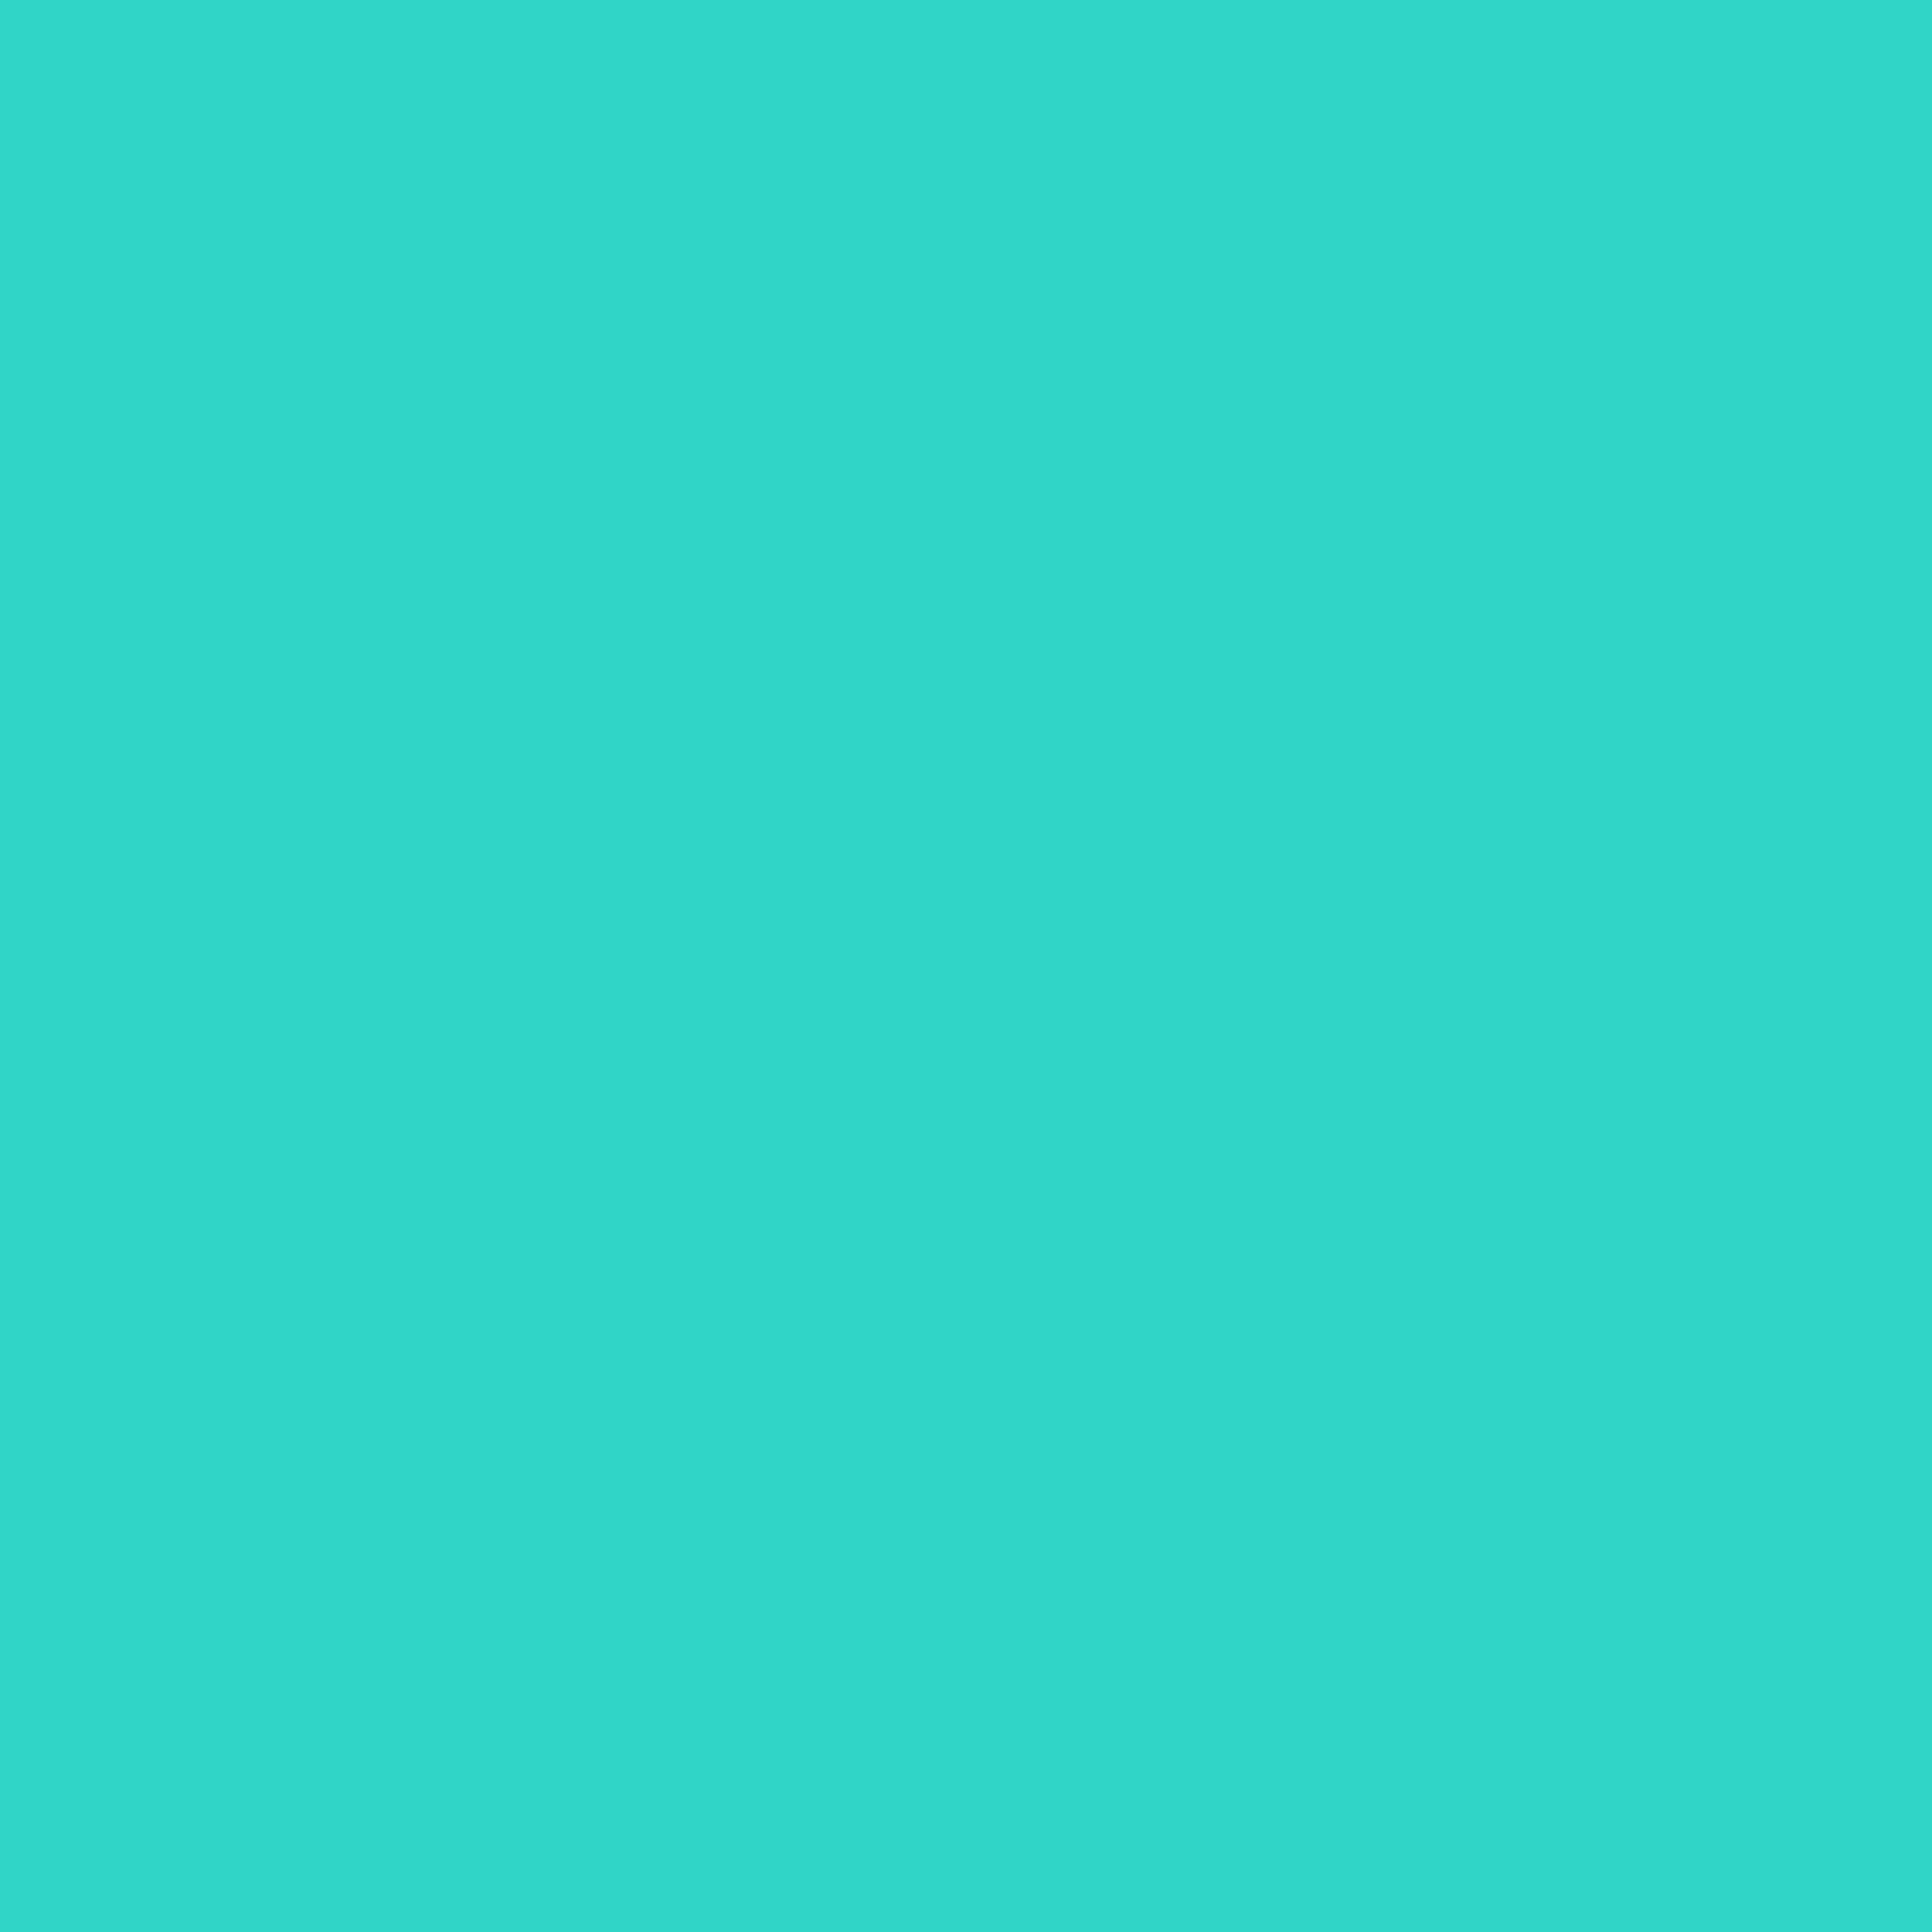 3600x3600 Turquoise Solid Color Background